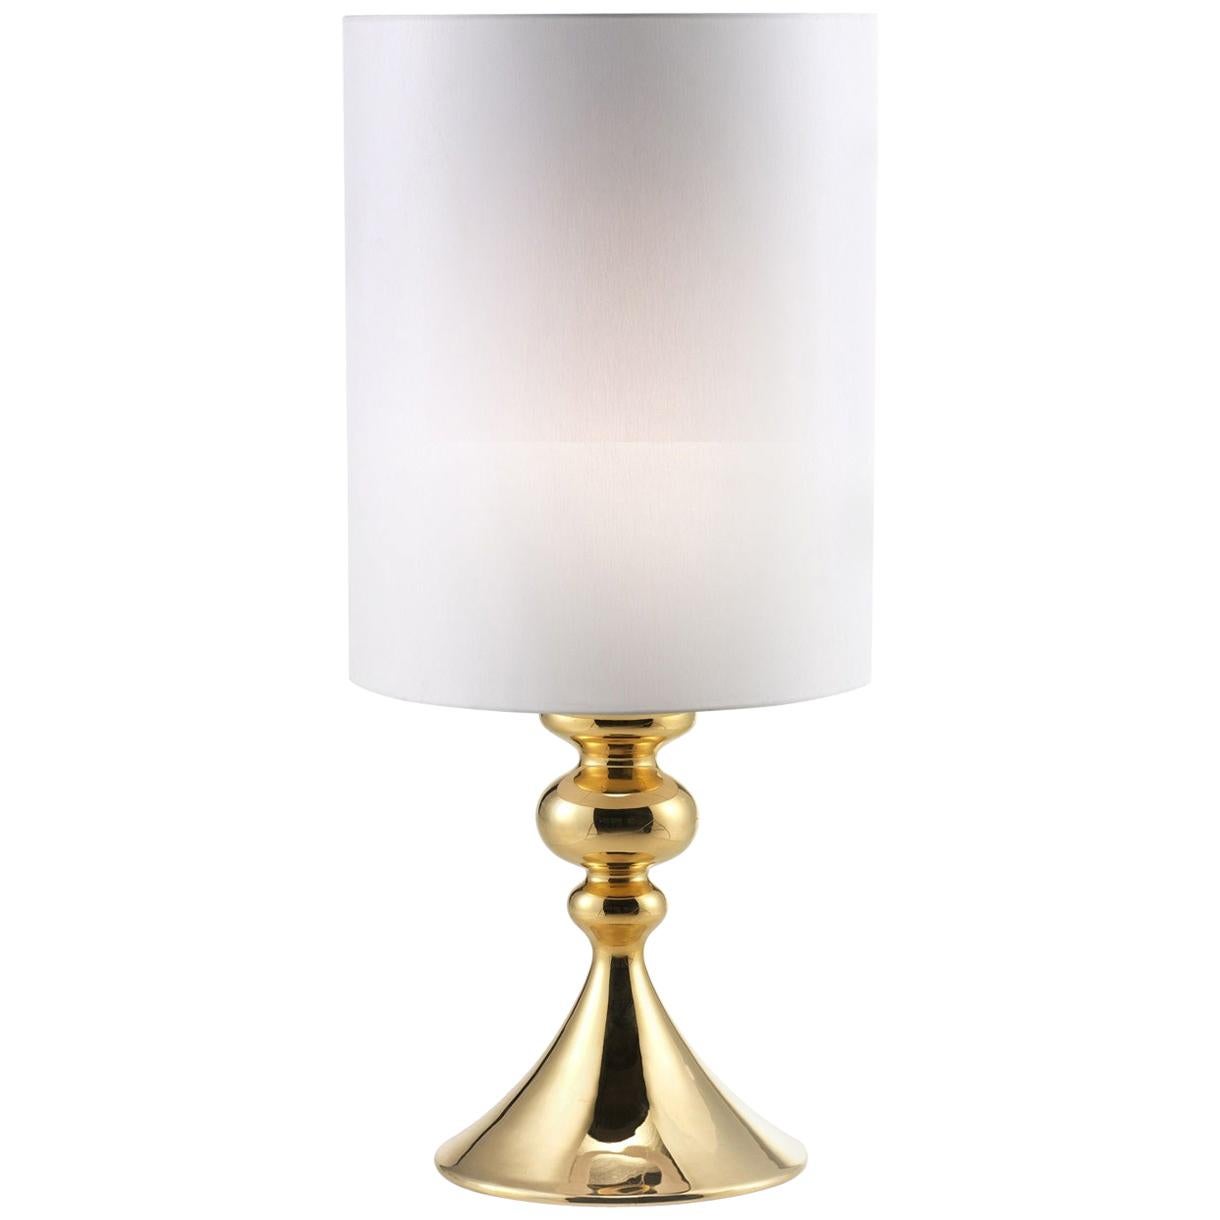 KAY, Ceramic Lamp Handcrafted in 24-Karat Gold by Gabriella B. Made in Italy For Sale